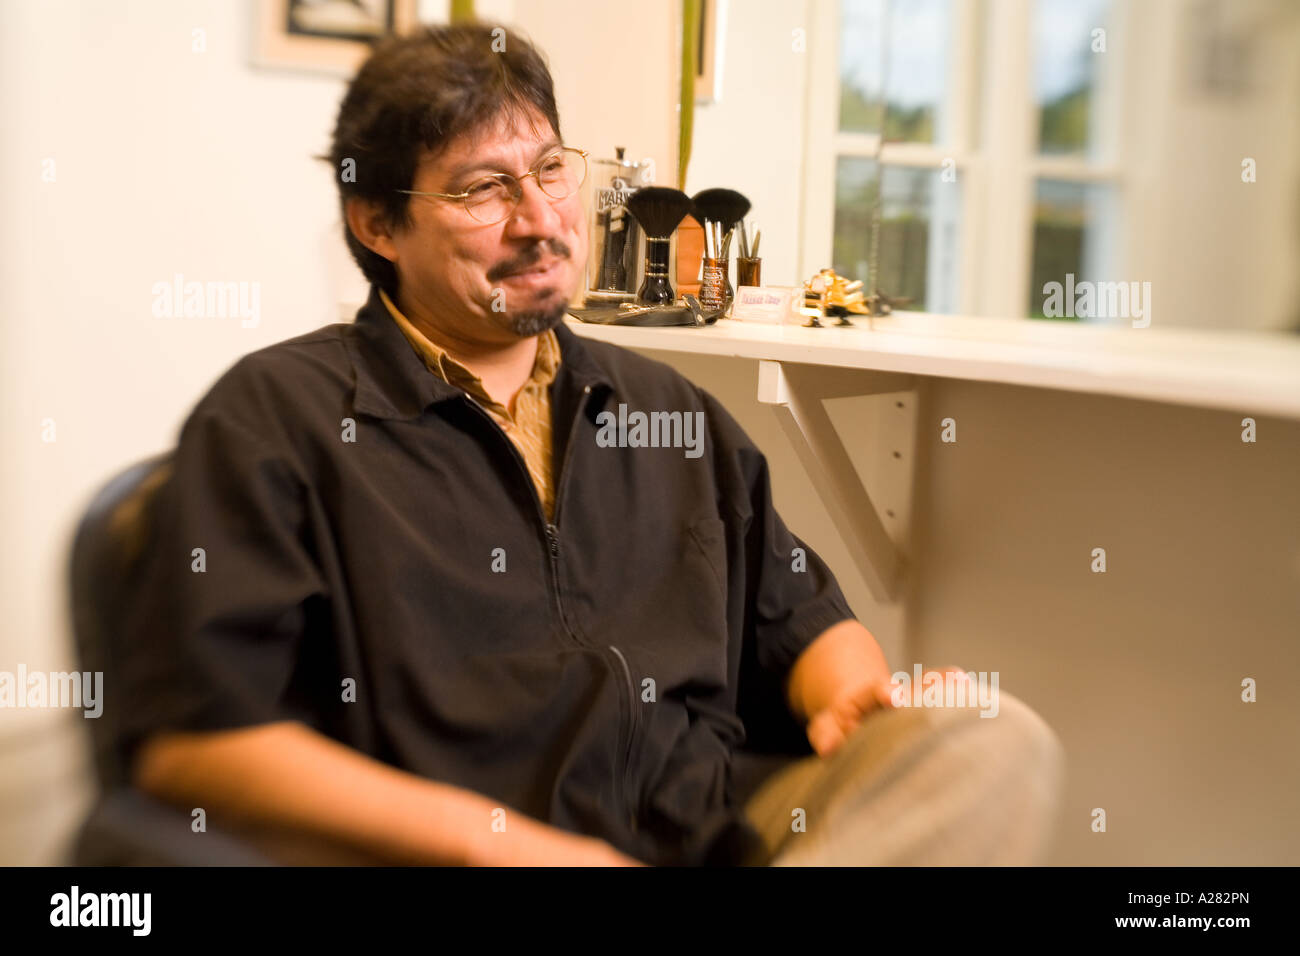 Mexican Barber Shop High Resolution Stock Photography and Images - Alamy